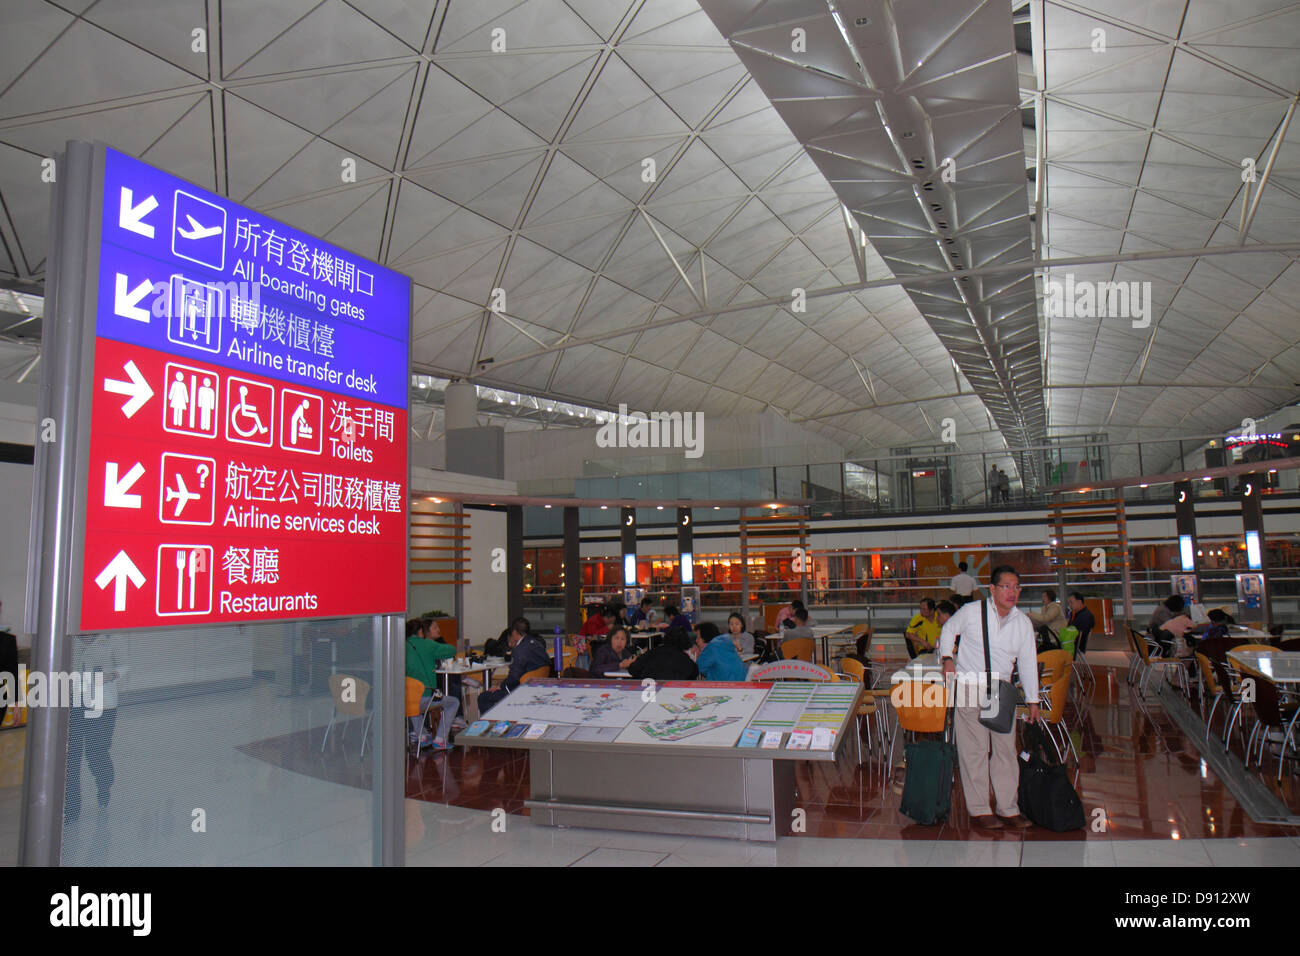 China,Asia,Far East,Orient,Oriental,Hong Kong,International Airport,HKG,terminal,gate,signs,information,directions,hanzi,Chinese,characters,Asian man Stock Photo